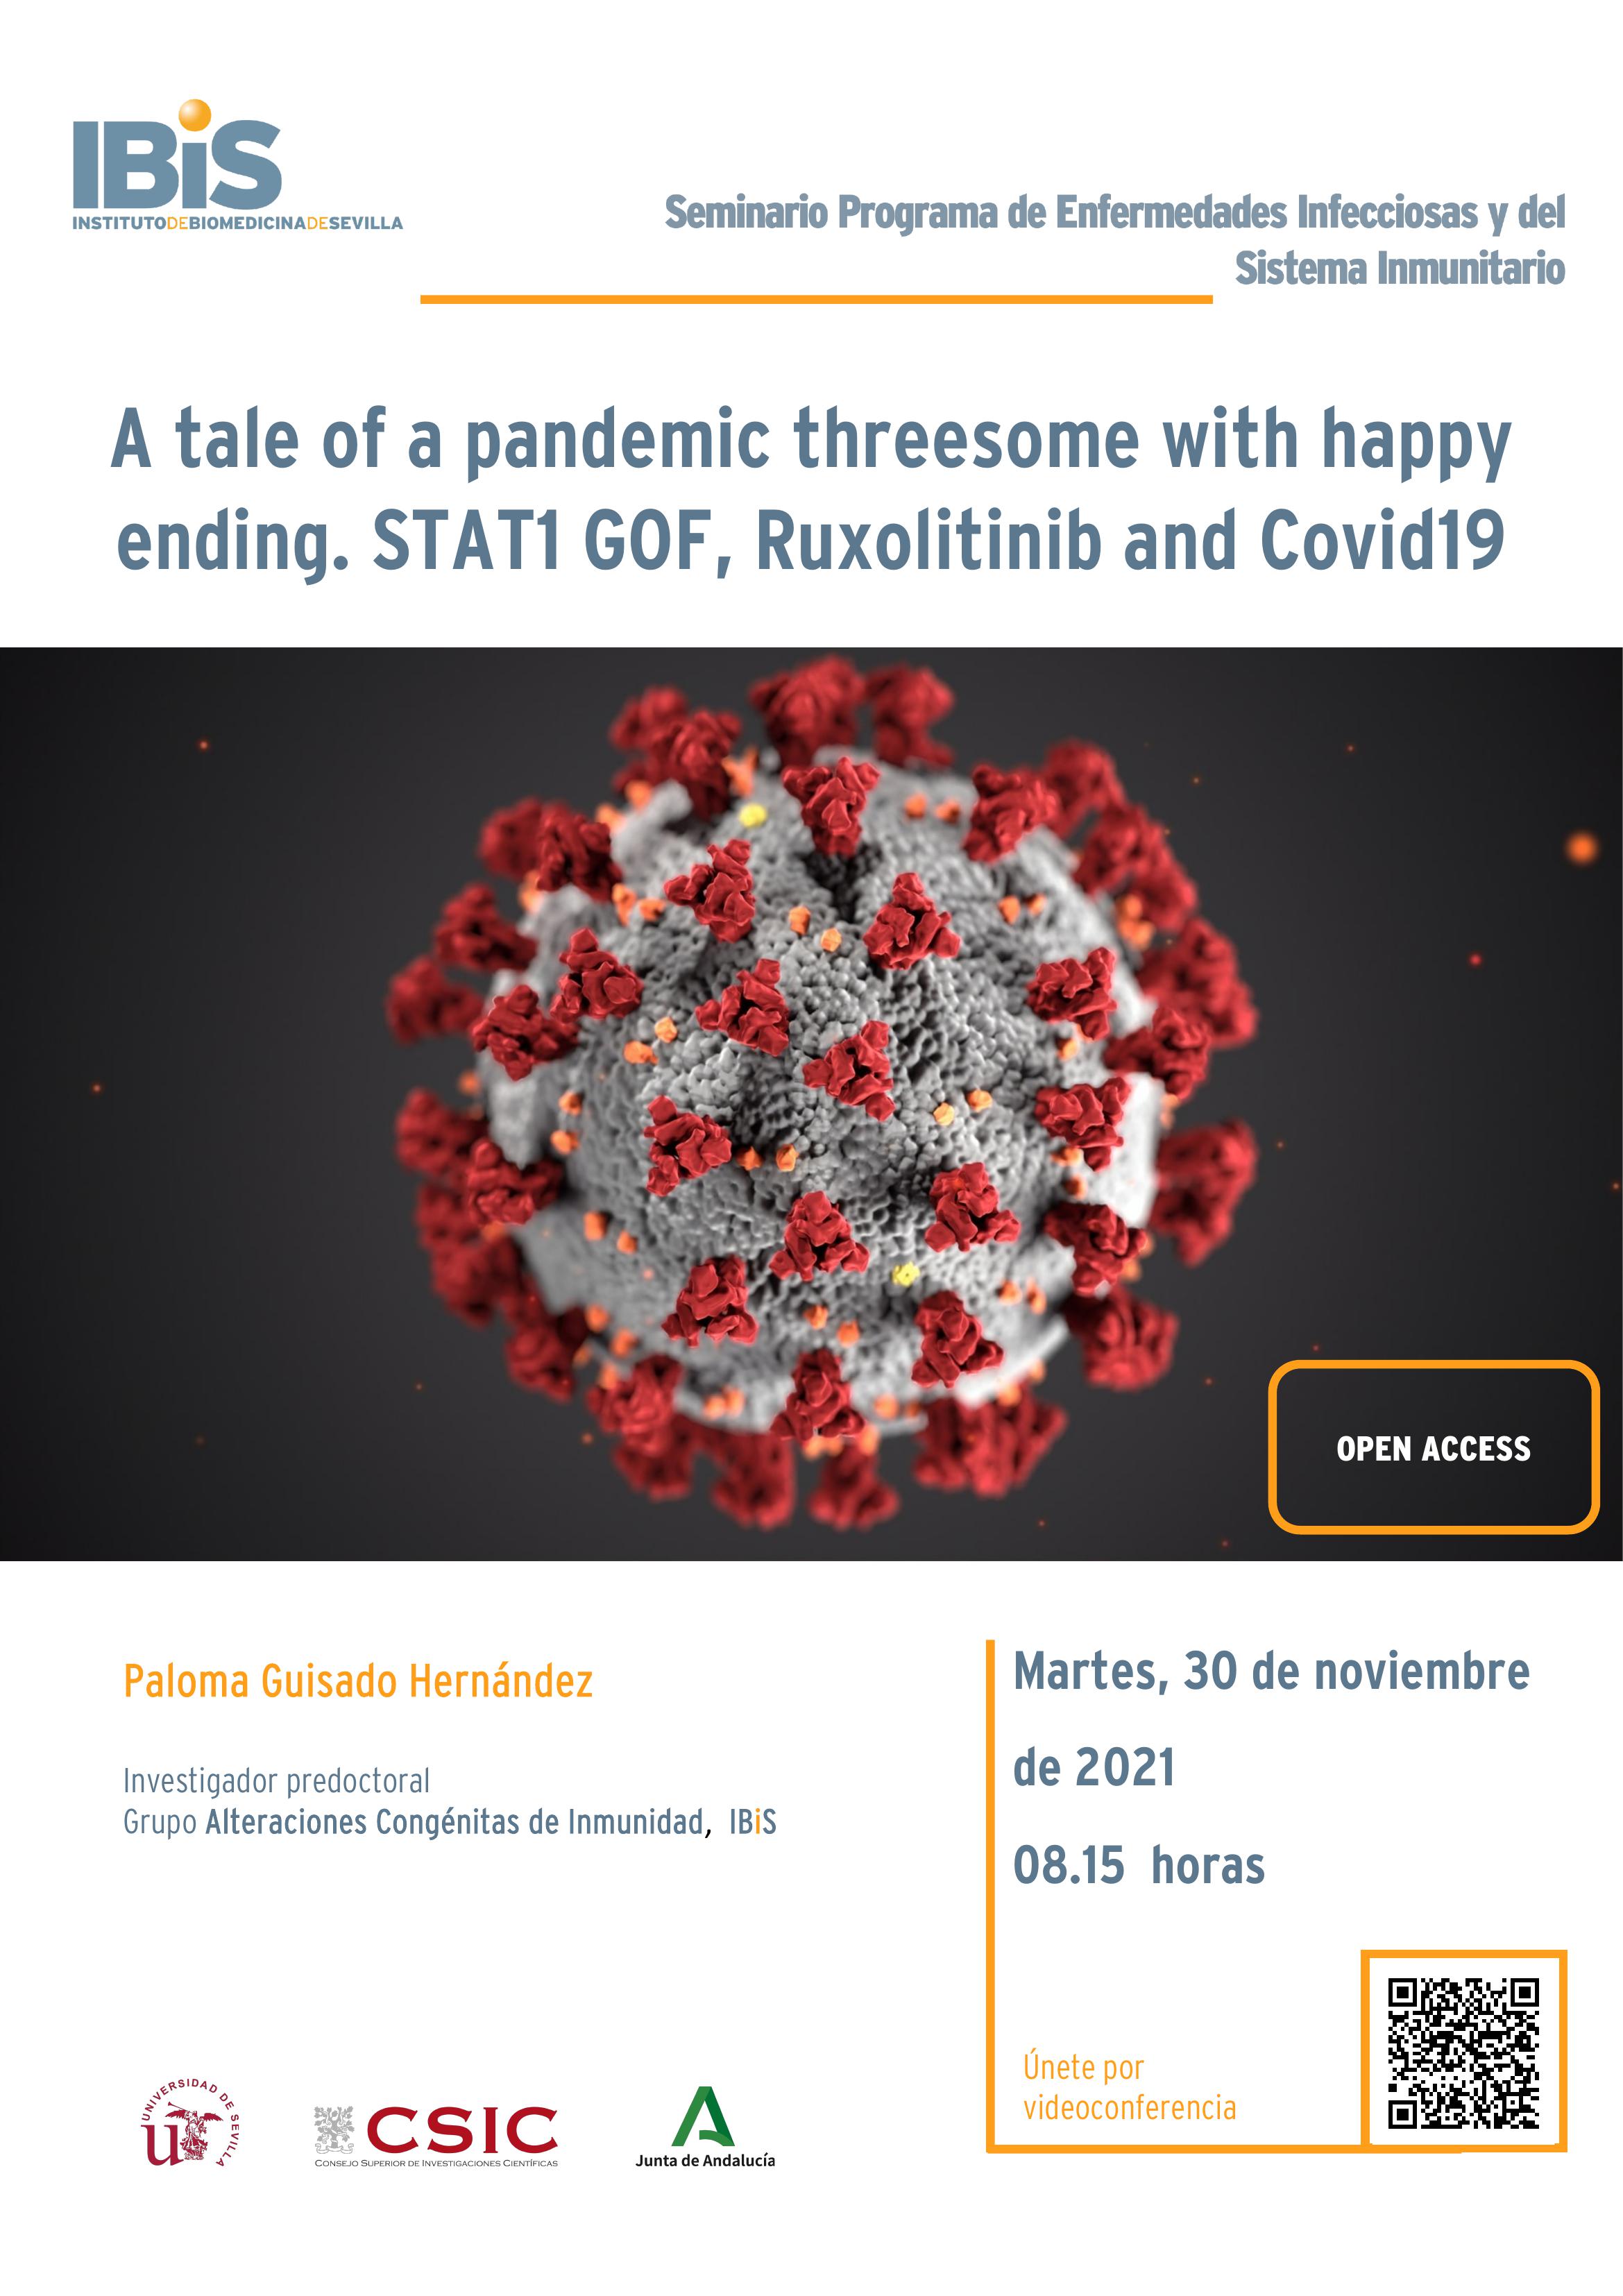 Poster: A tale of a pandemic threesome with happy ending. STAT1 GOF, Ruxolitinib and Covid19